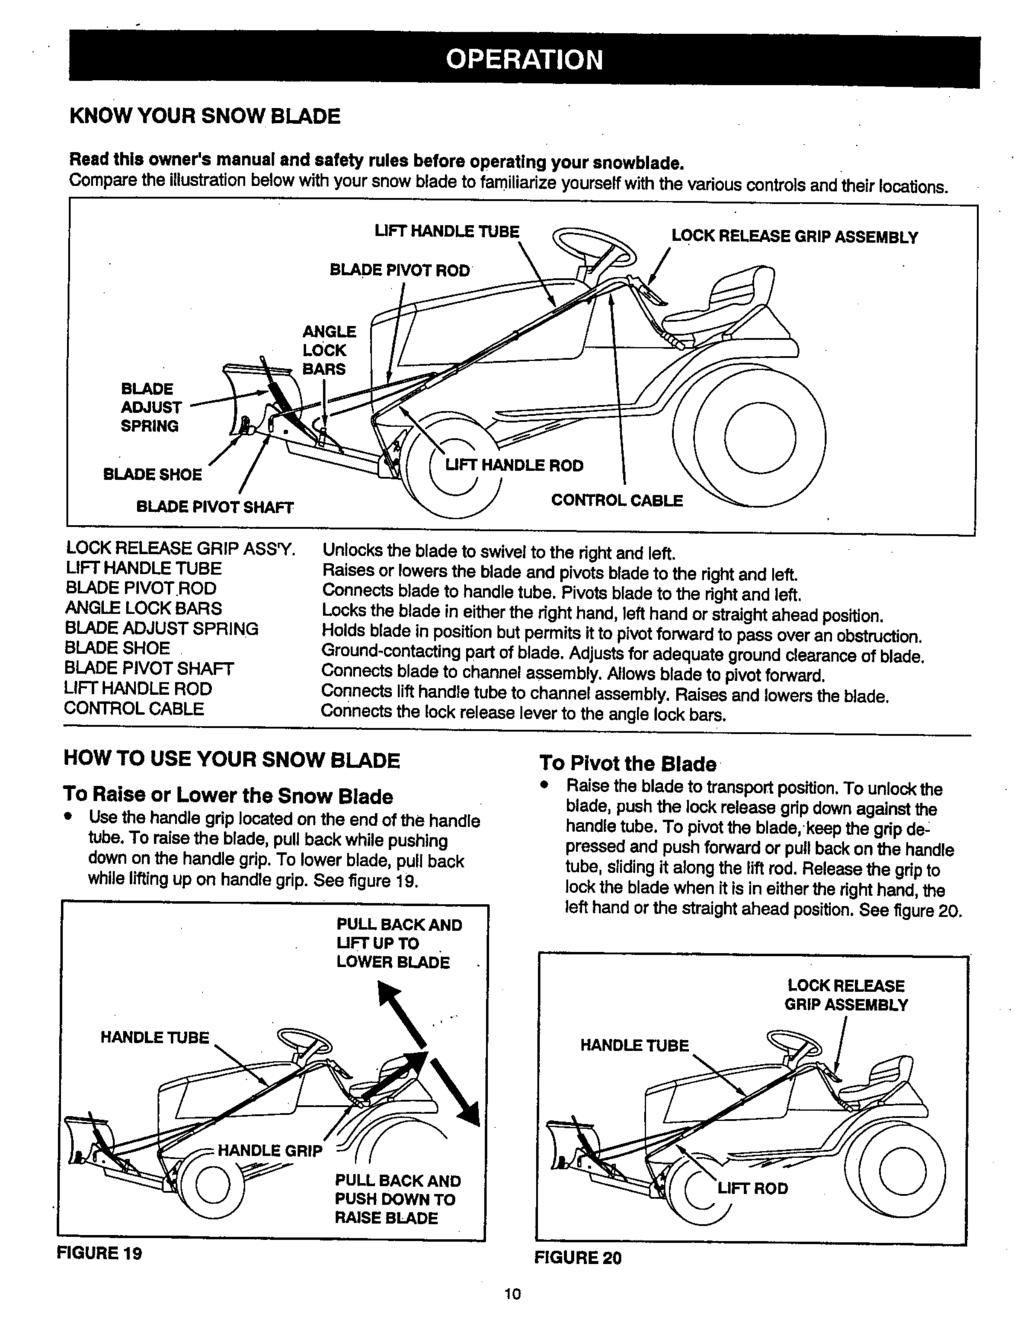 KNOW YOUR SNOW BLADE Read this owner's manual and safety rules before operating your snowblade.